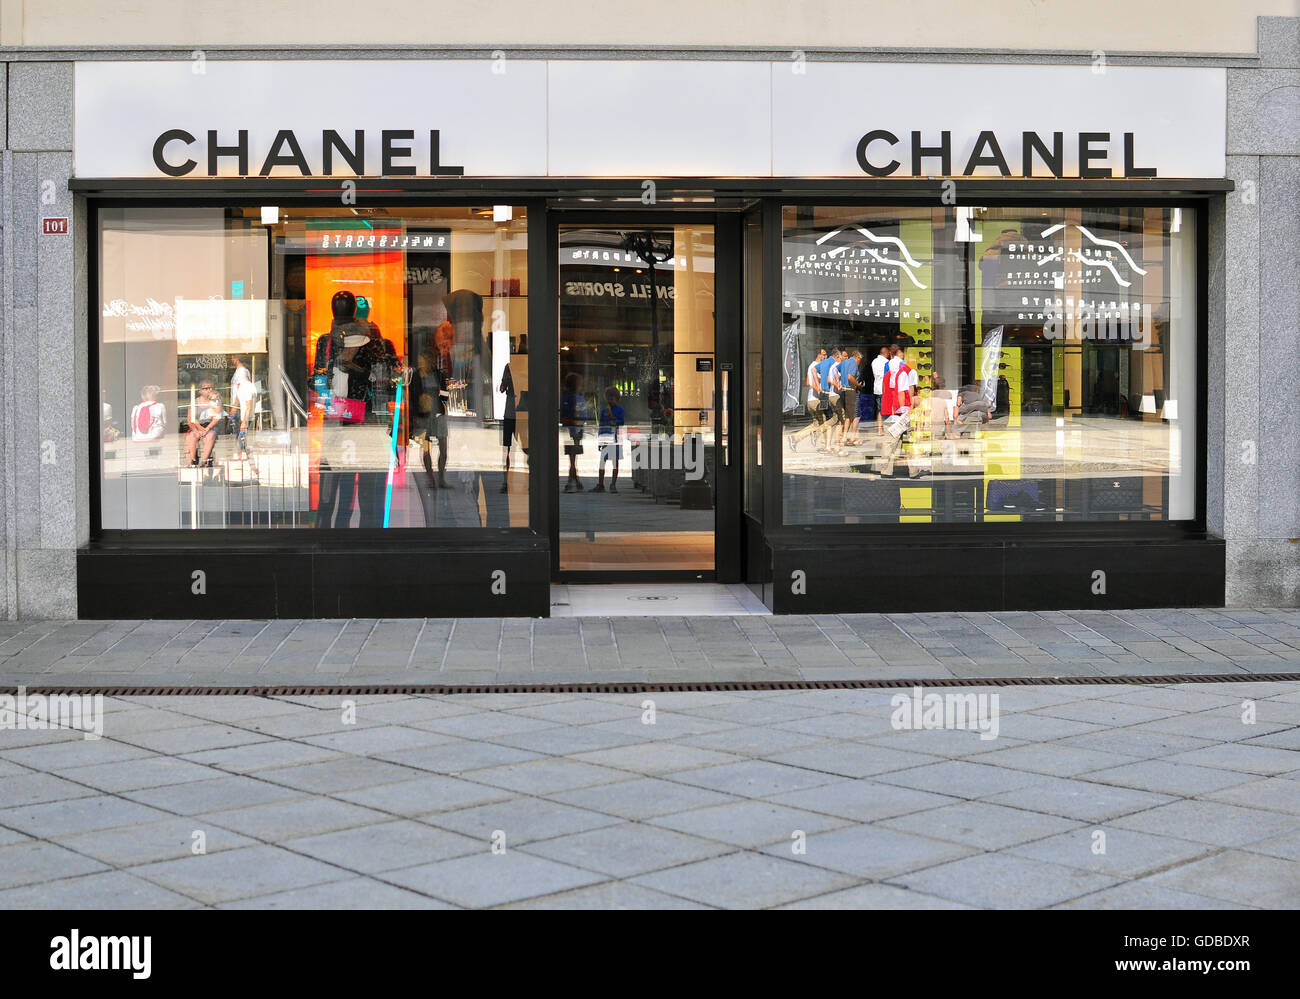 BEVERLY HILLS, CA/USA - JANUARY 3, 2015: Chanel Retail Store Exterior.  Chanel Is A French High Fashion House That Specializes In Ready-to-wear  Clothes, Luxury Goods And Fashion Accessories. Stock Photo, Picture and